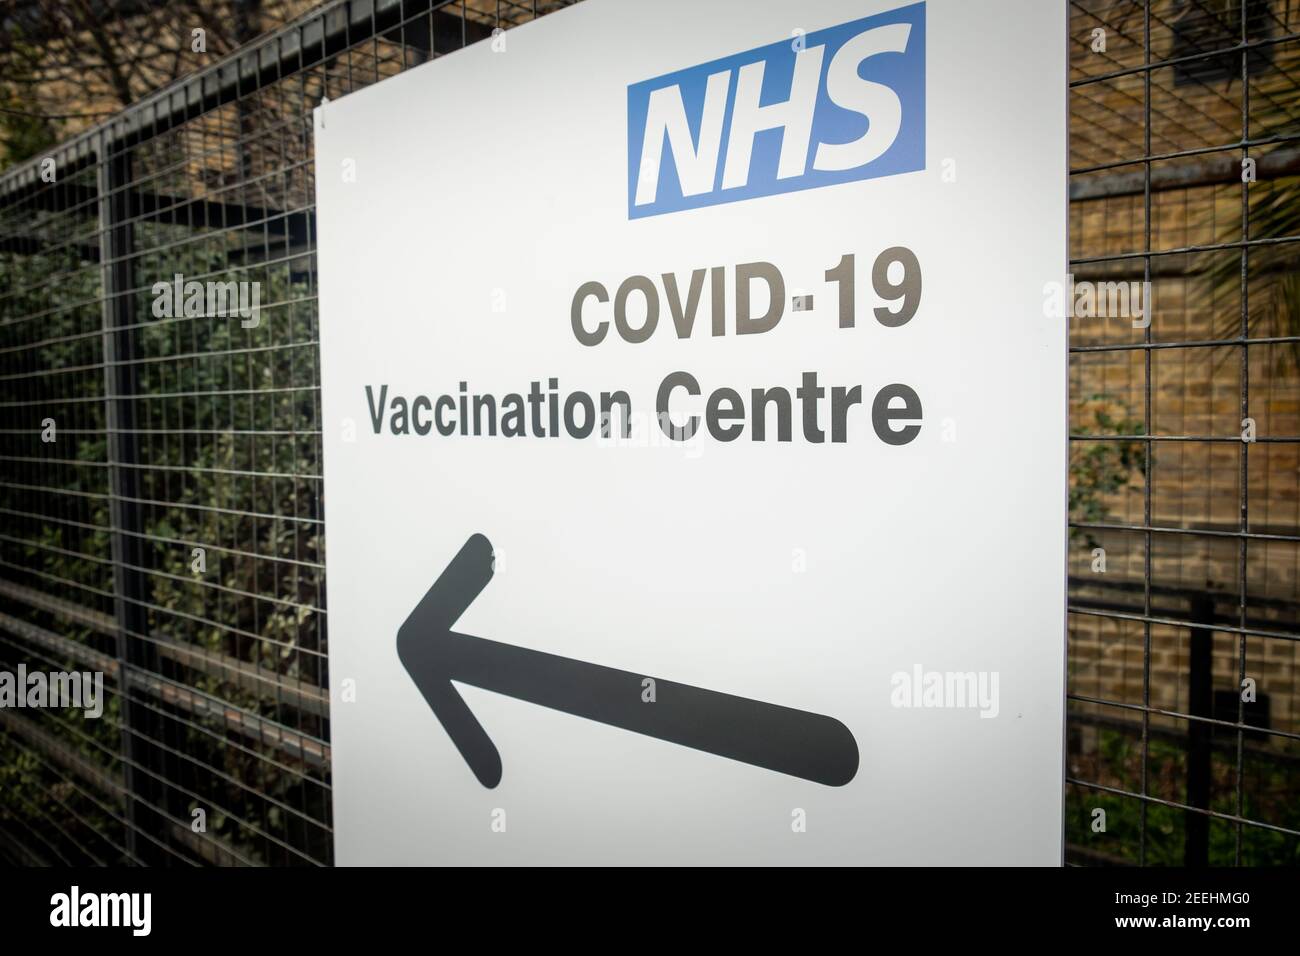 London- February, 2021: Covid 19 NHS Vaccination Centre sign in Ealing, West London Stock Photo